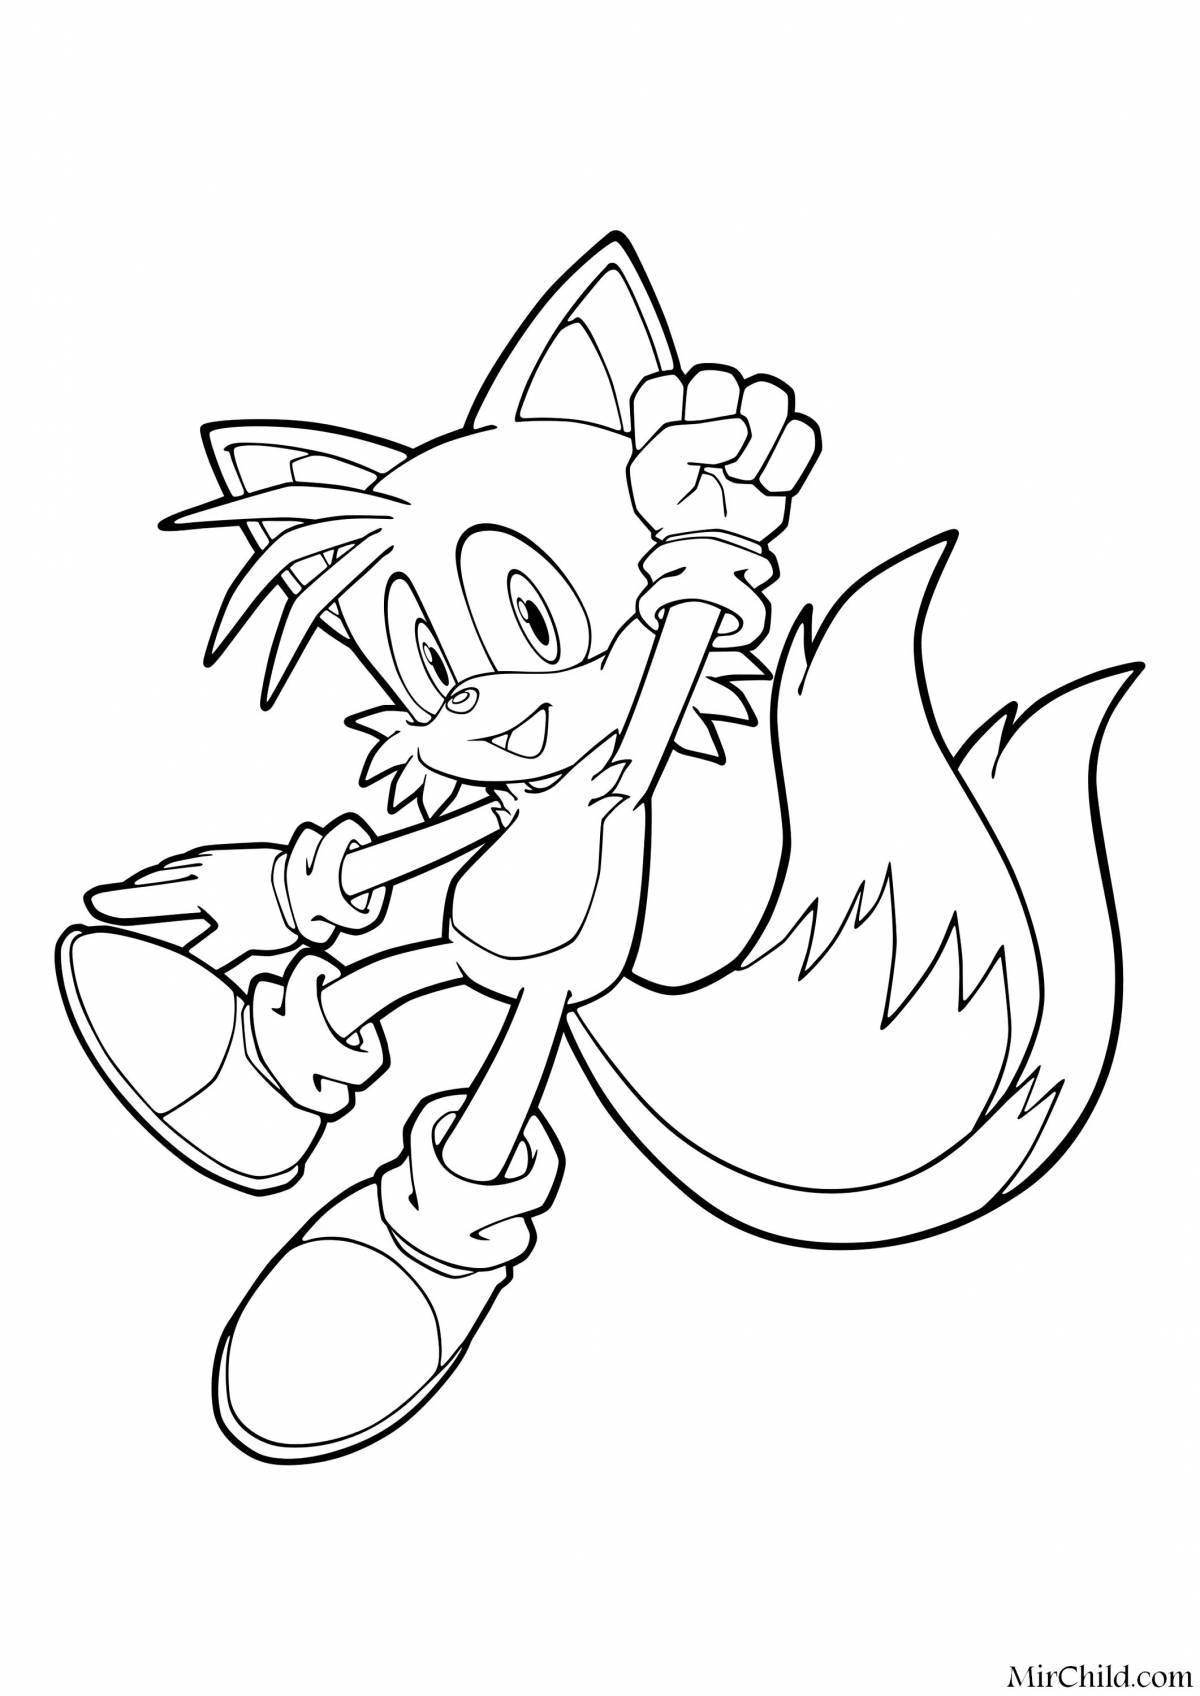 Majestic yellow sonic coloring page